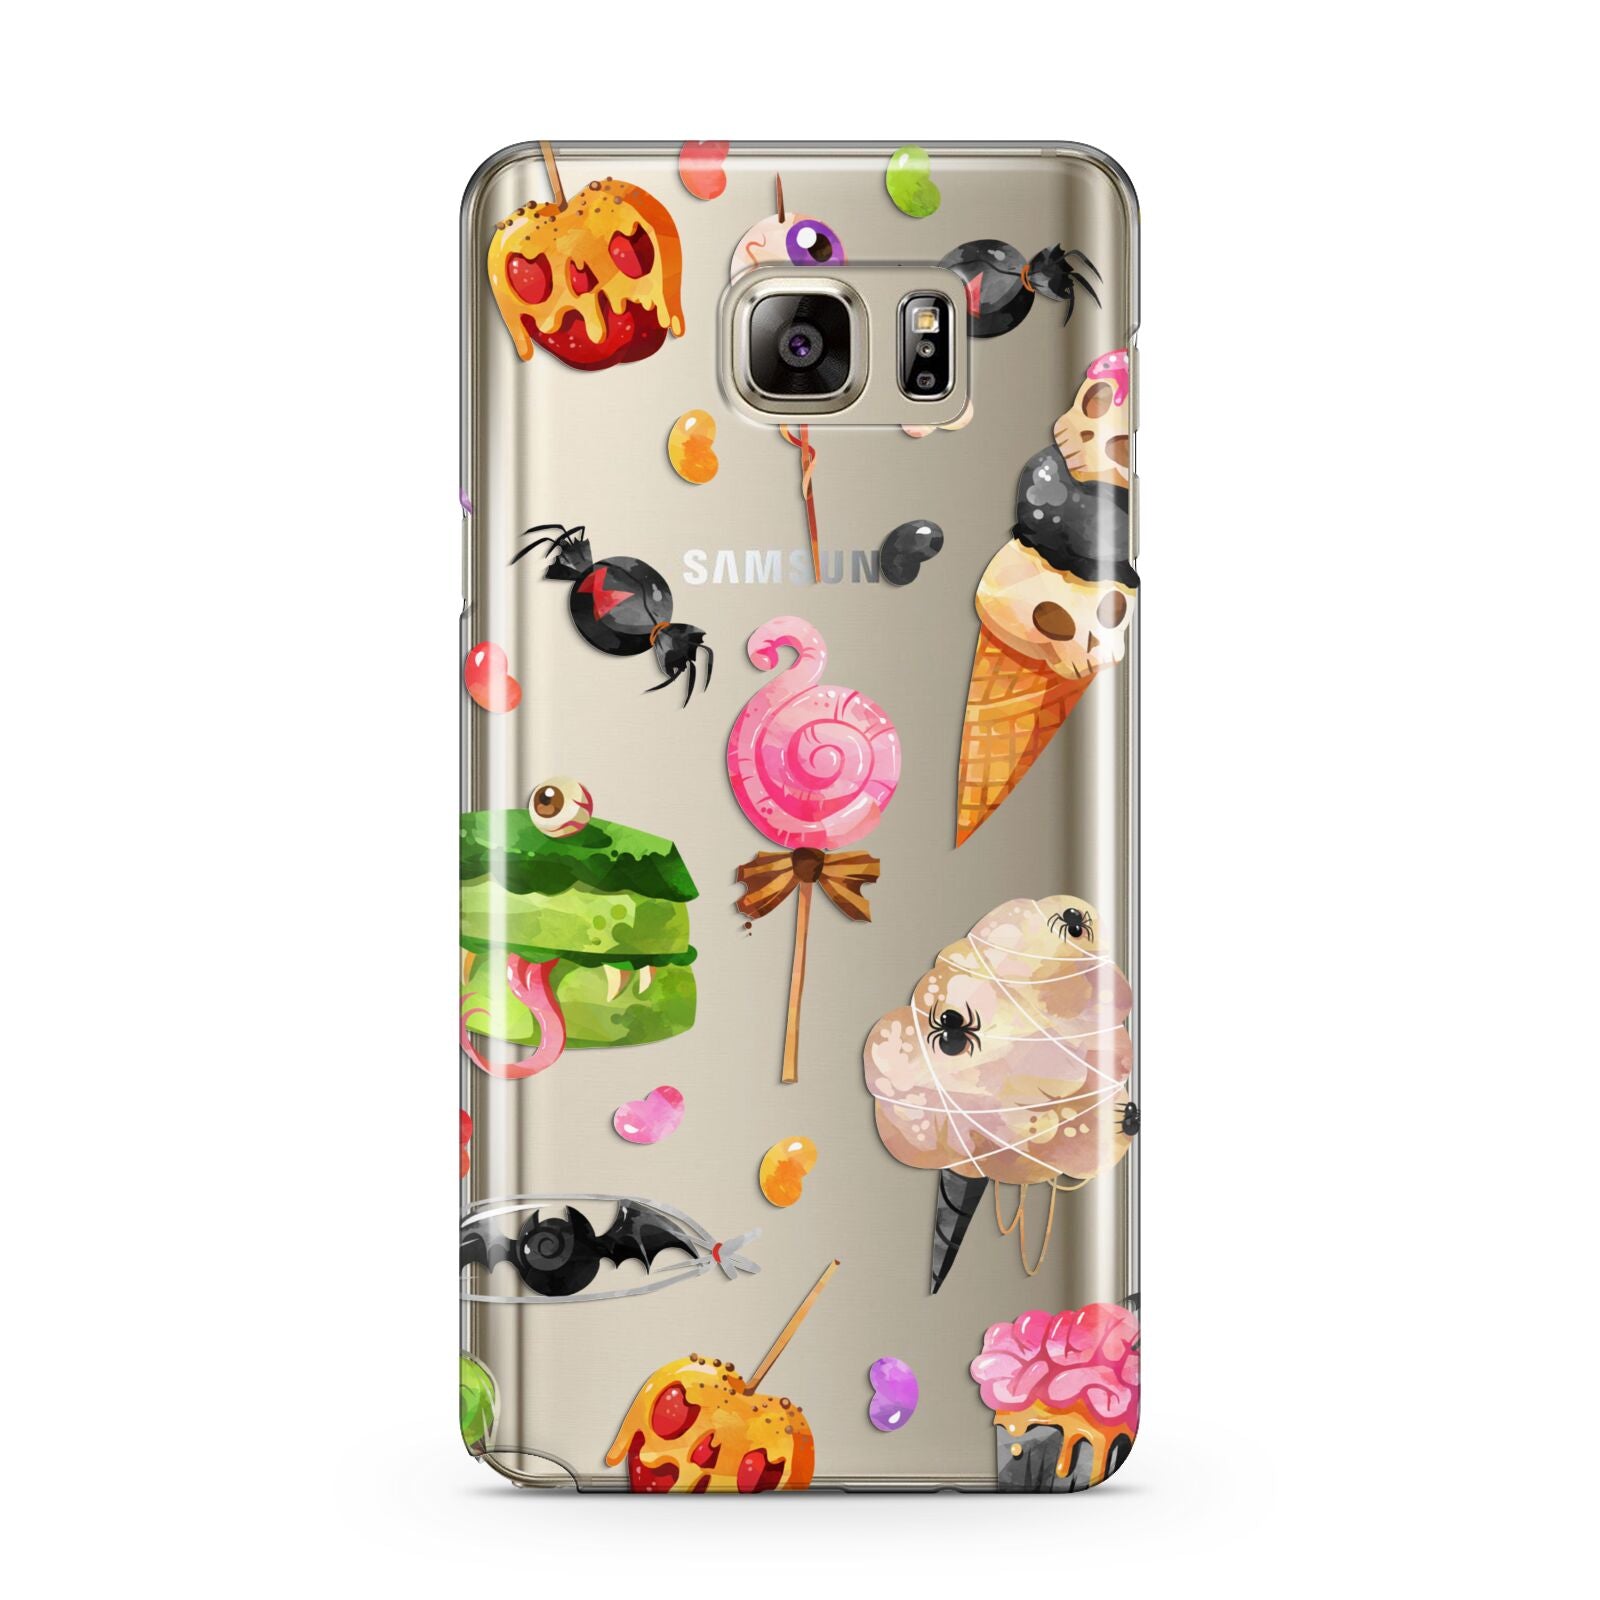 Halloween Cakes and Candy Samsung Galaxy Note 5 Case